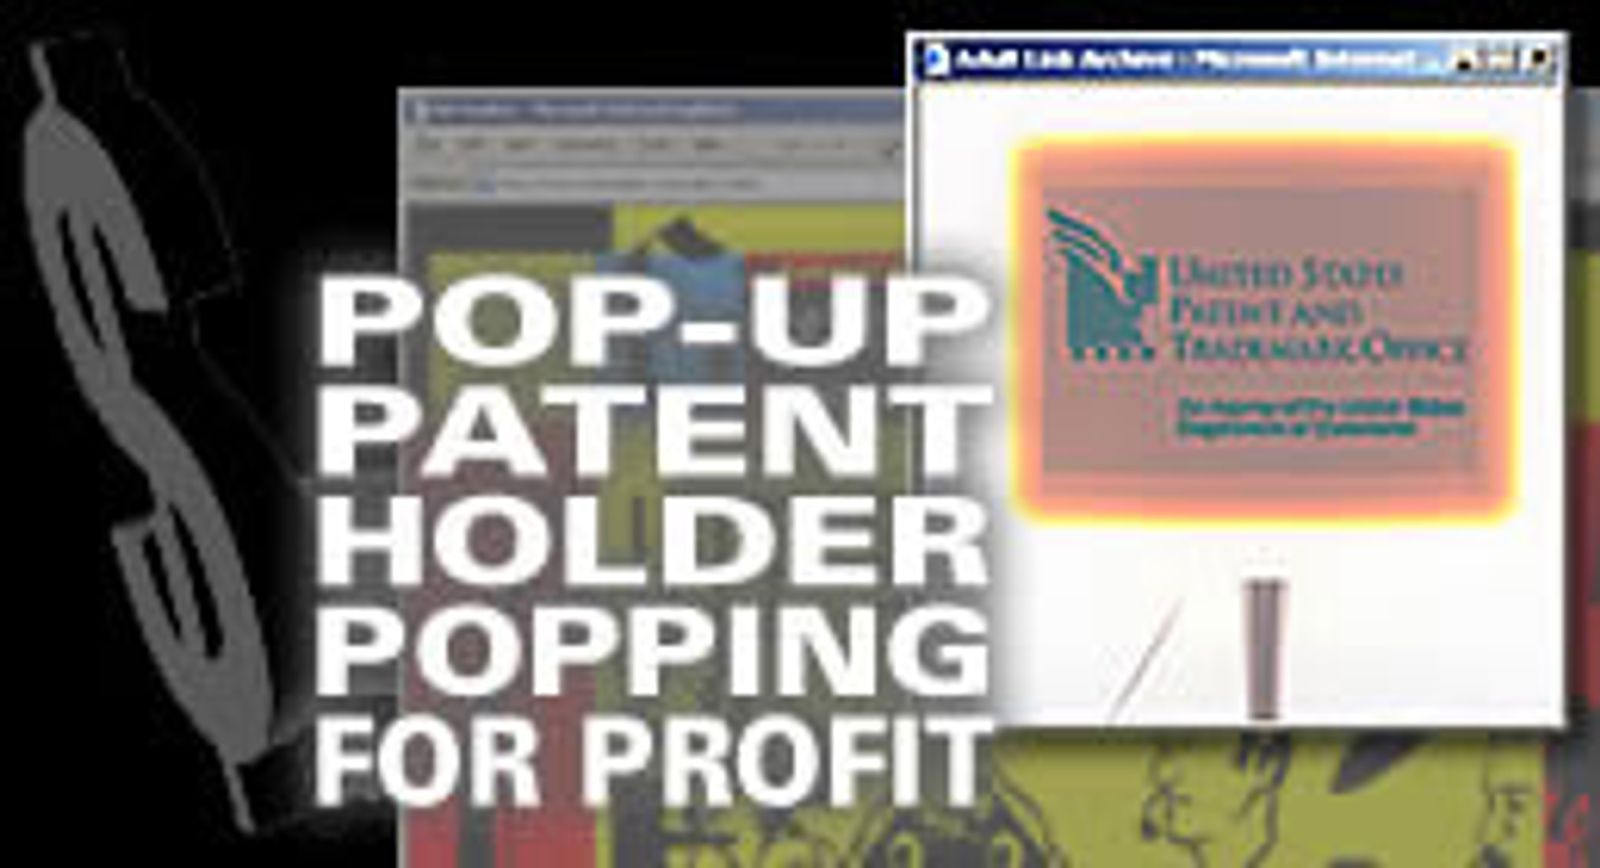 Pop-Up Patent Holder Popping For Profit